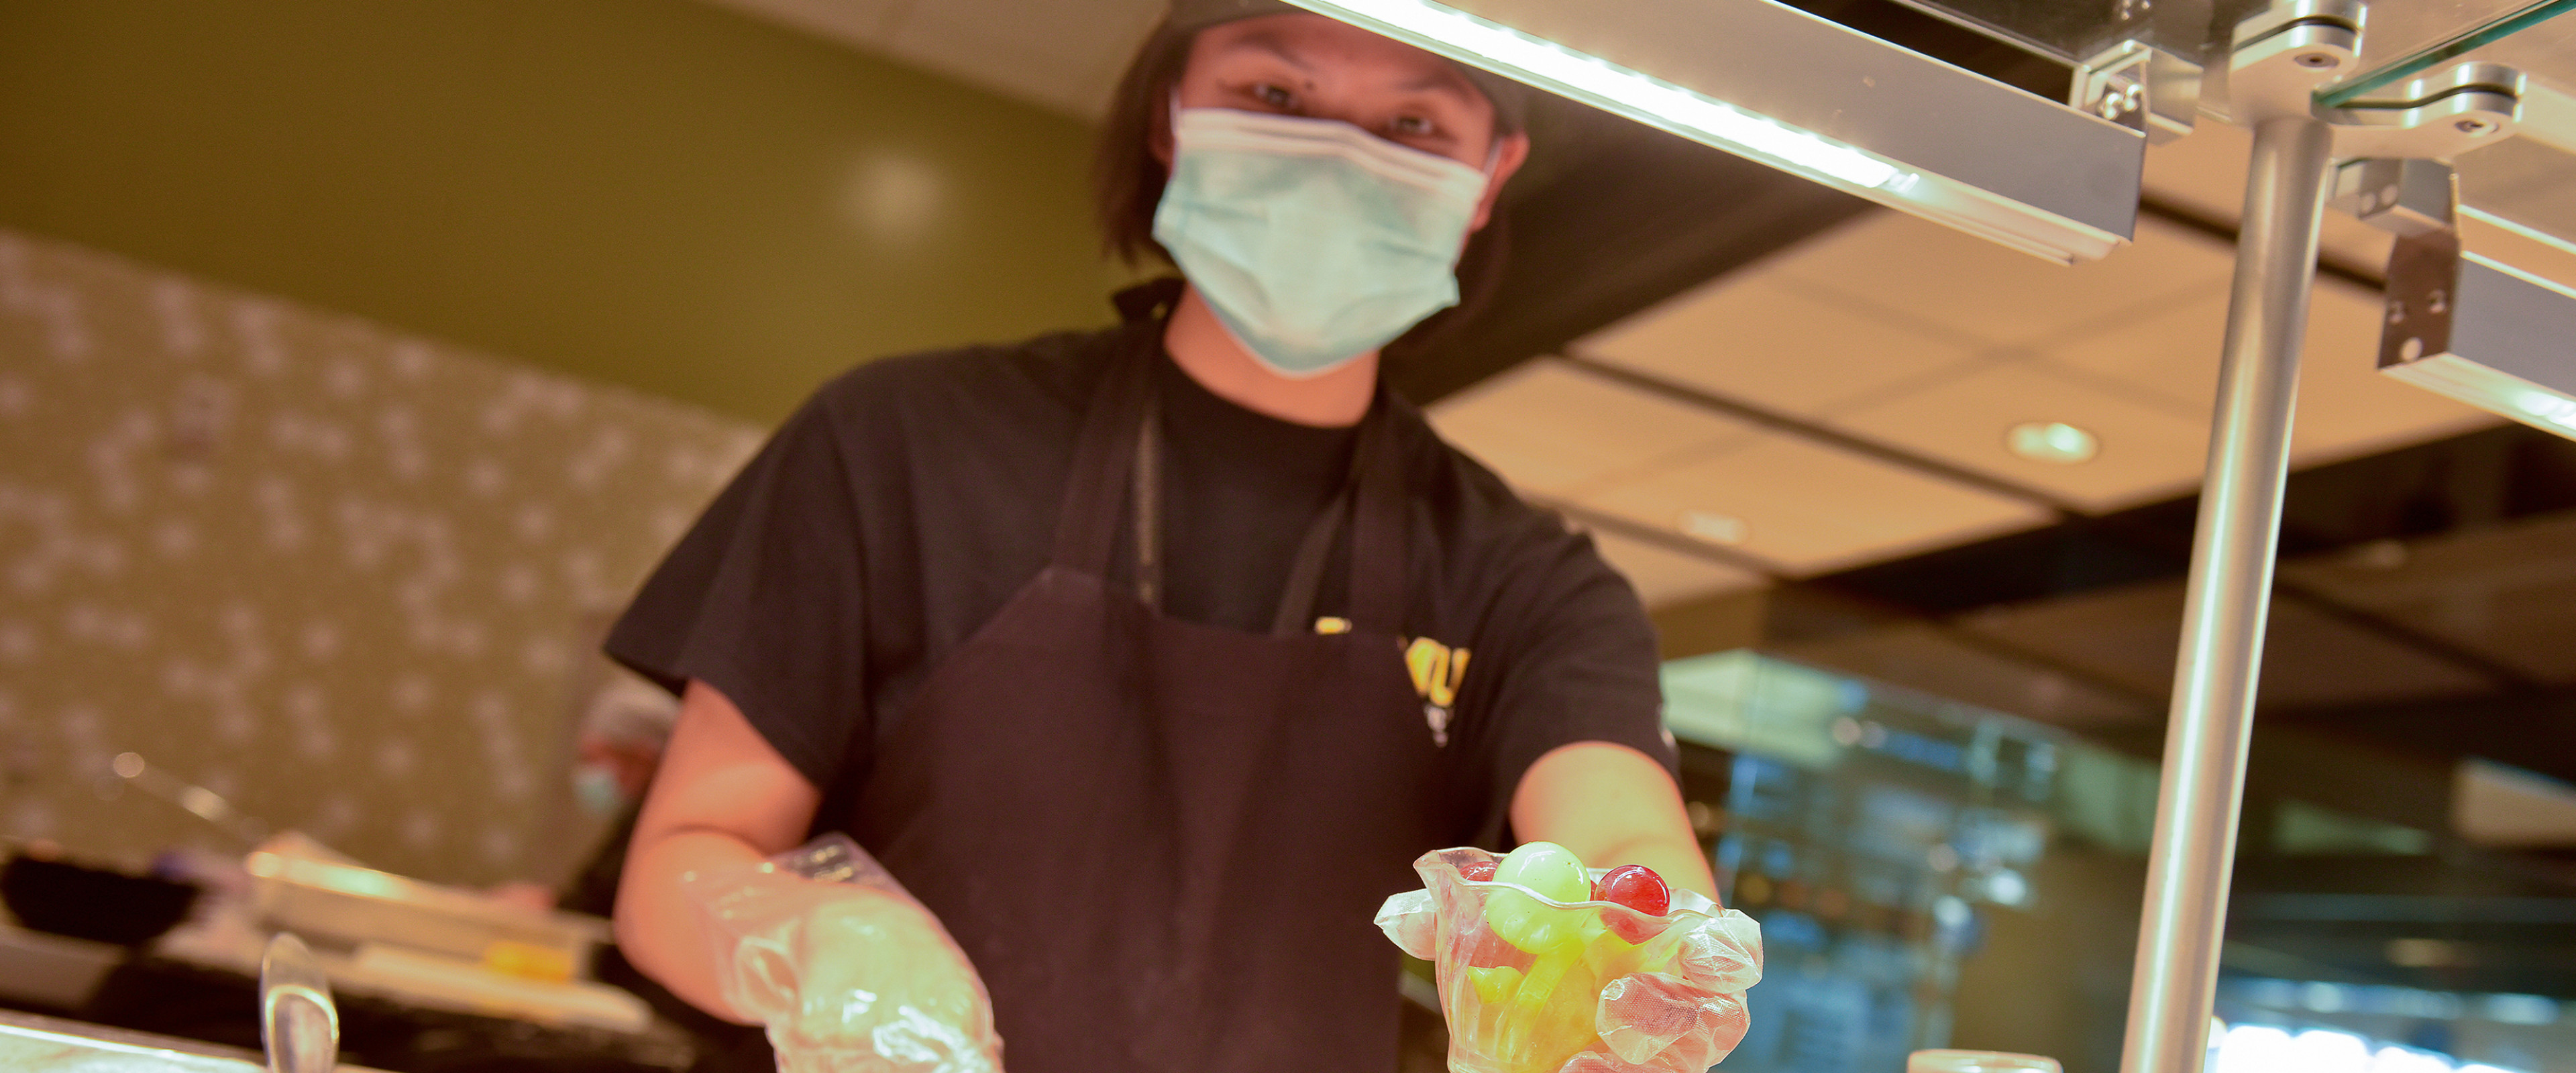 Student worker serving fruit cups